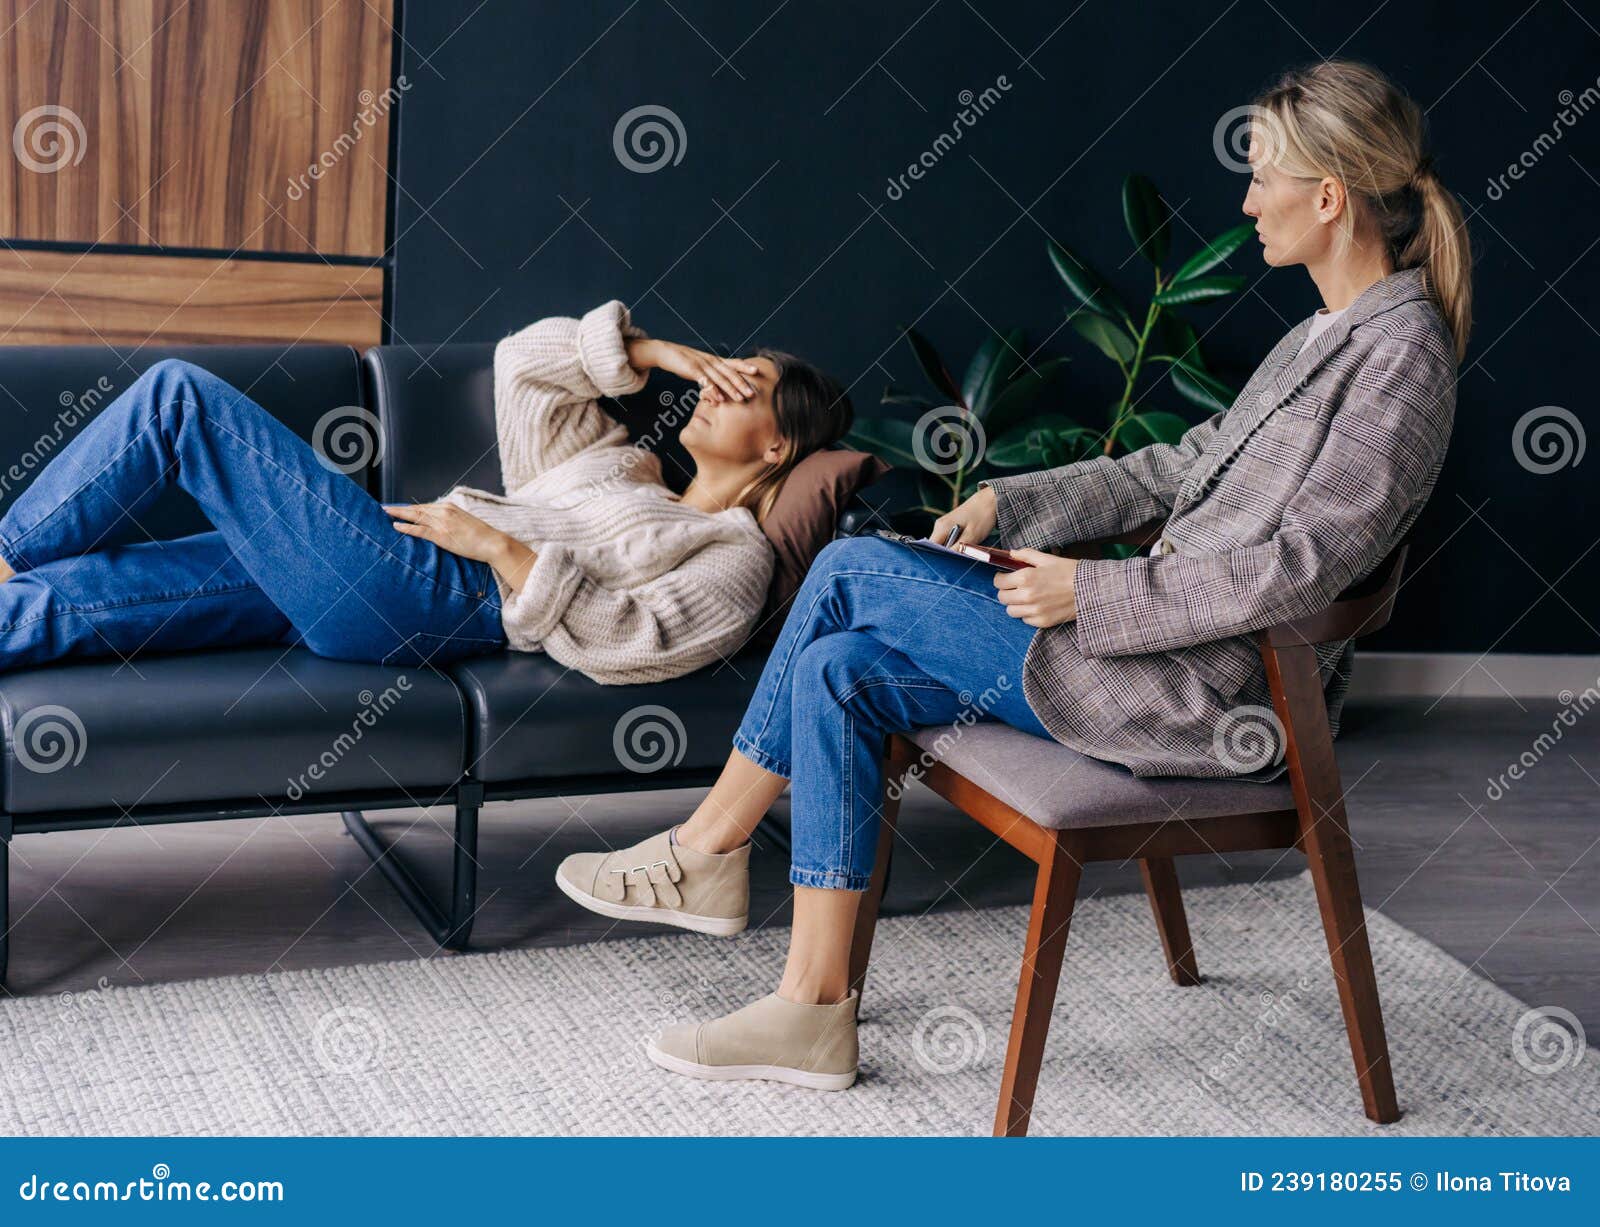 A Psychoanalyst In A Workshop Listens To A Patient Lying On A Couch And 